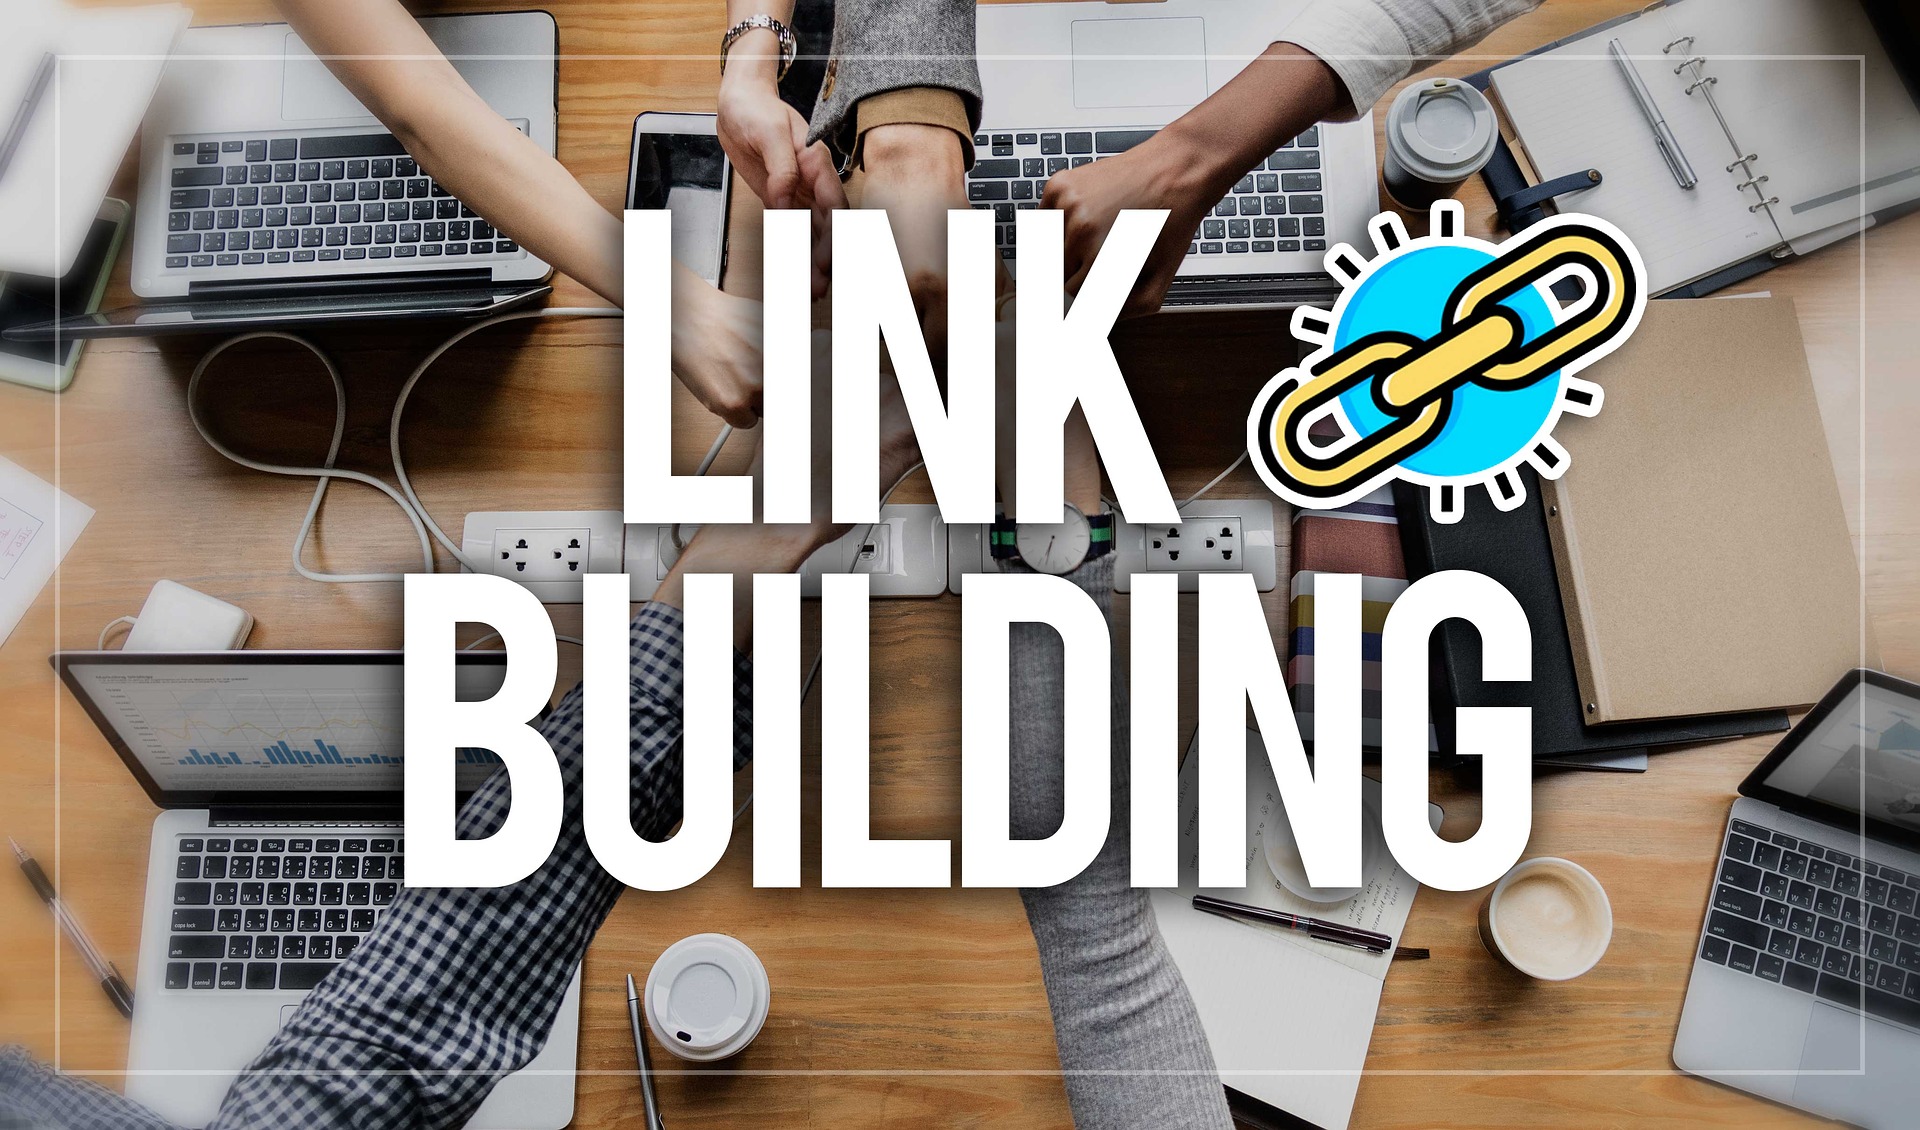 What Is Link Building and How Can It Help My Business?